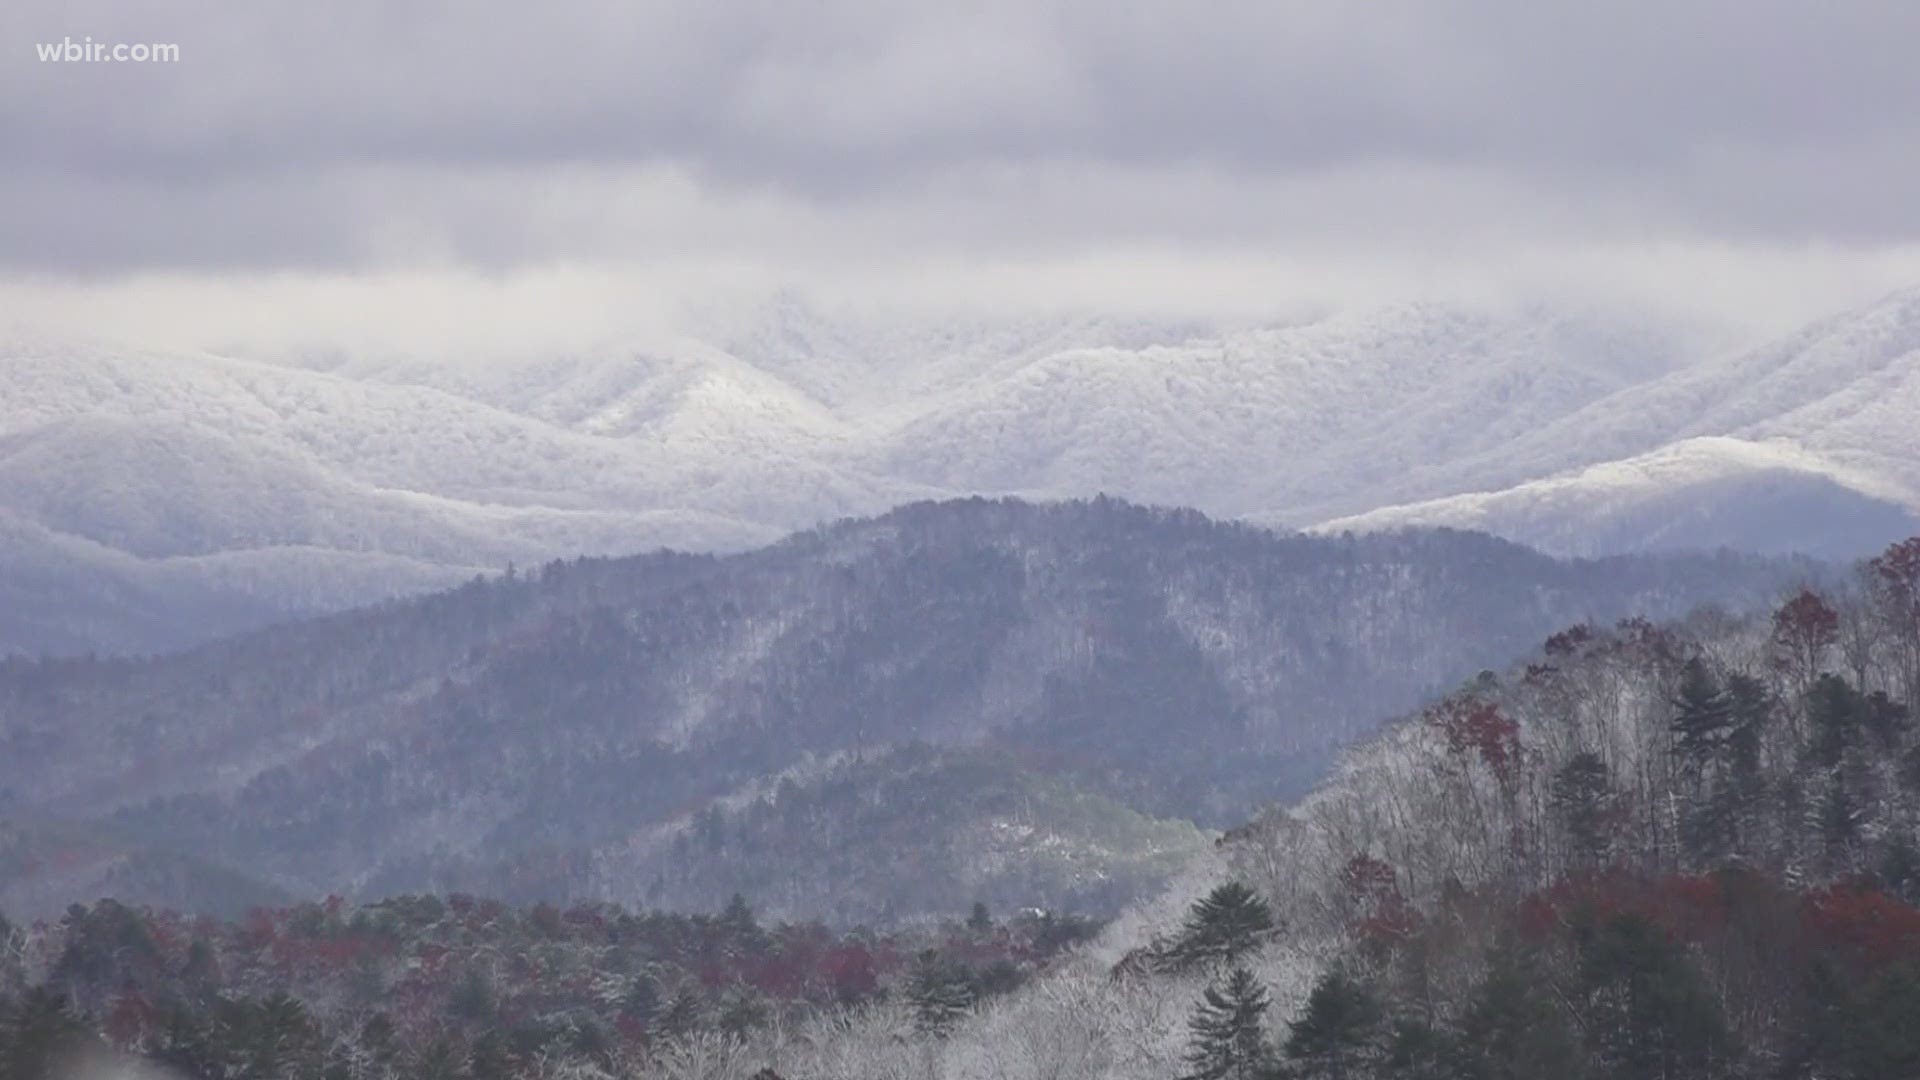 Take a look at these beautiful snow scenes from the Great Smoky Mountains National Park.